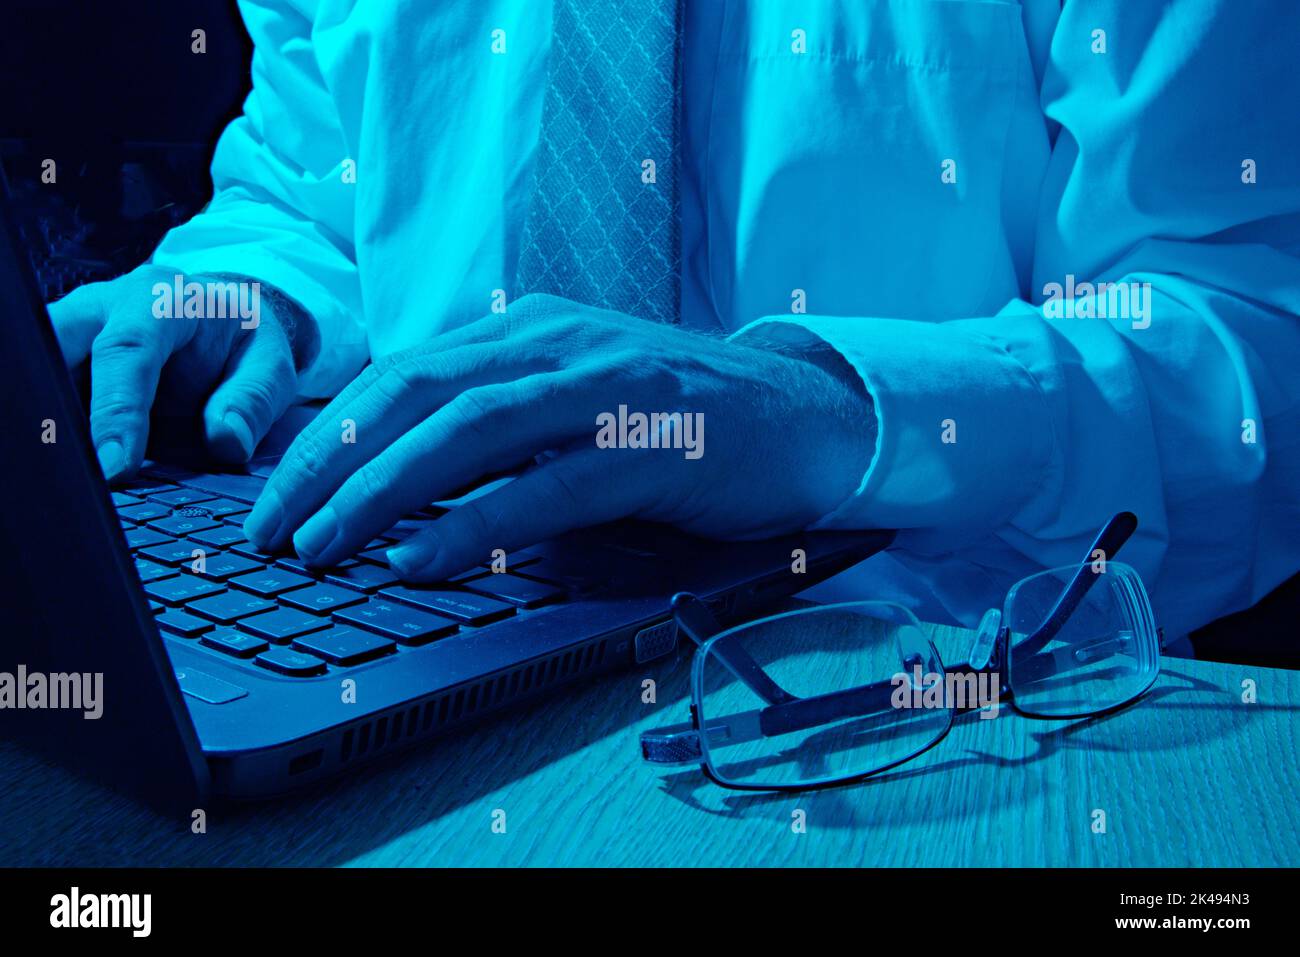 Cyber security analyst using computer in blue light Stock Photo